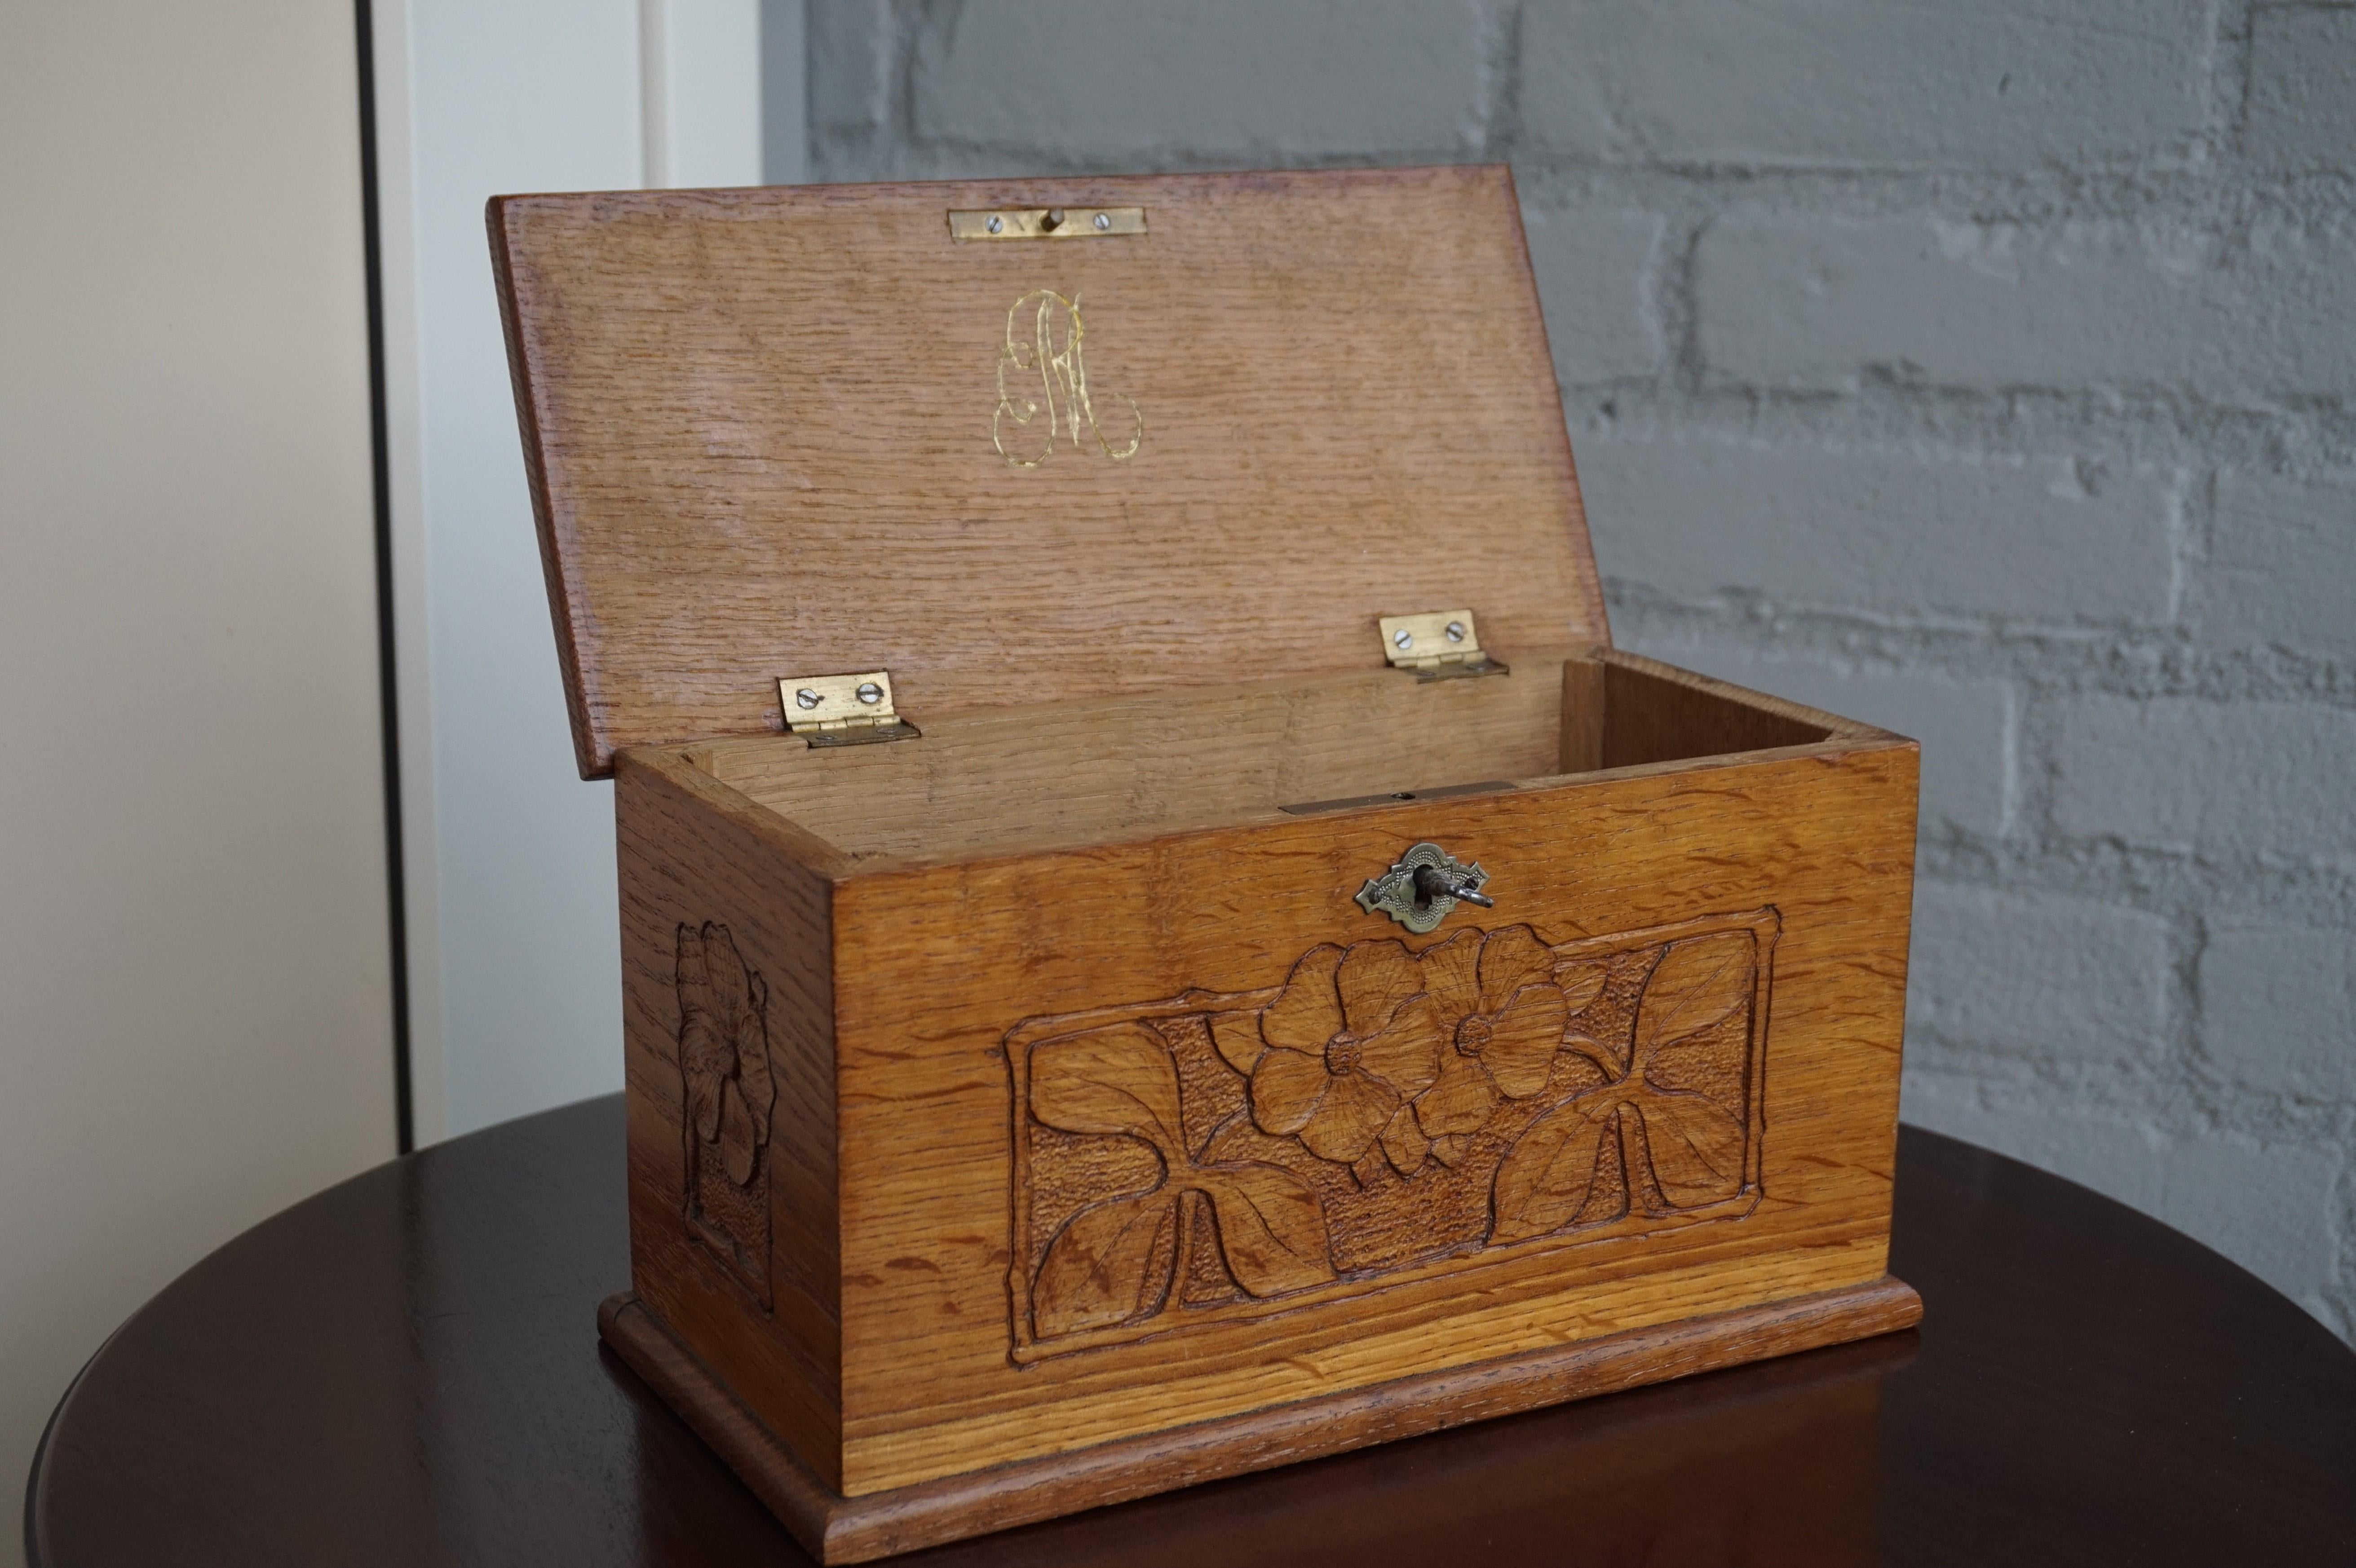 European Antique and Unique Arts & Crafts Oak Jewelry Box with Hand Carved Flower Decor For Sale